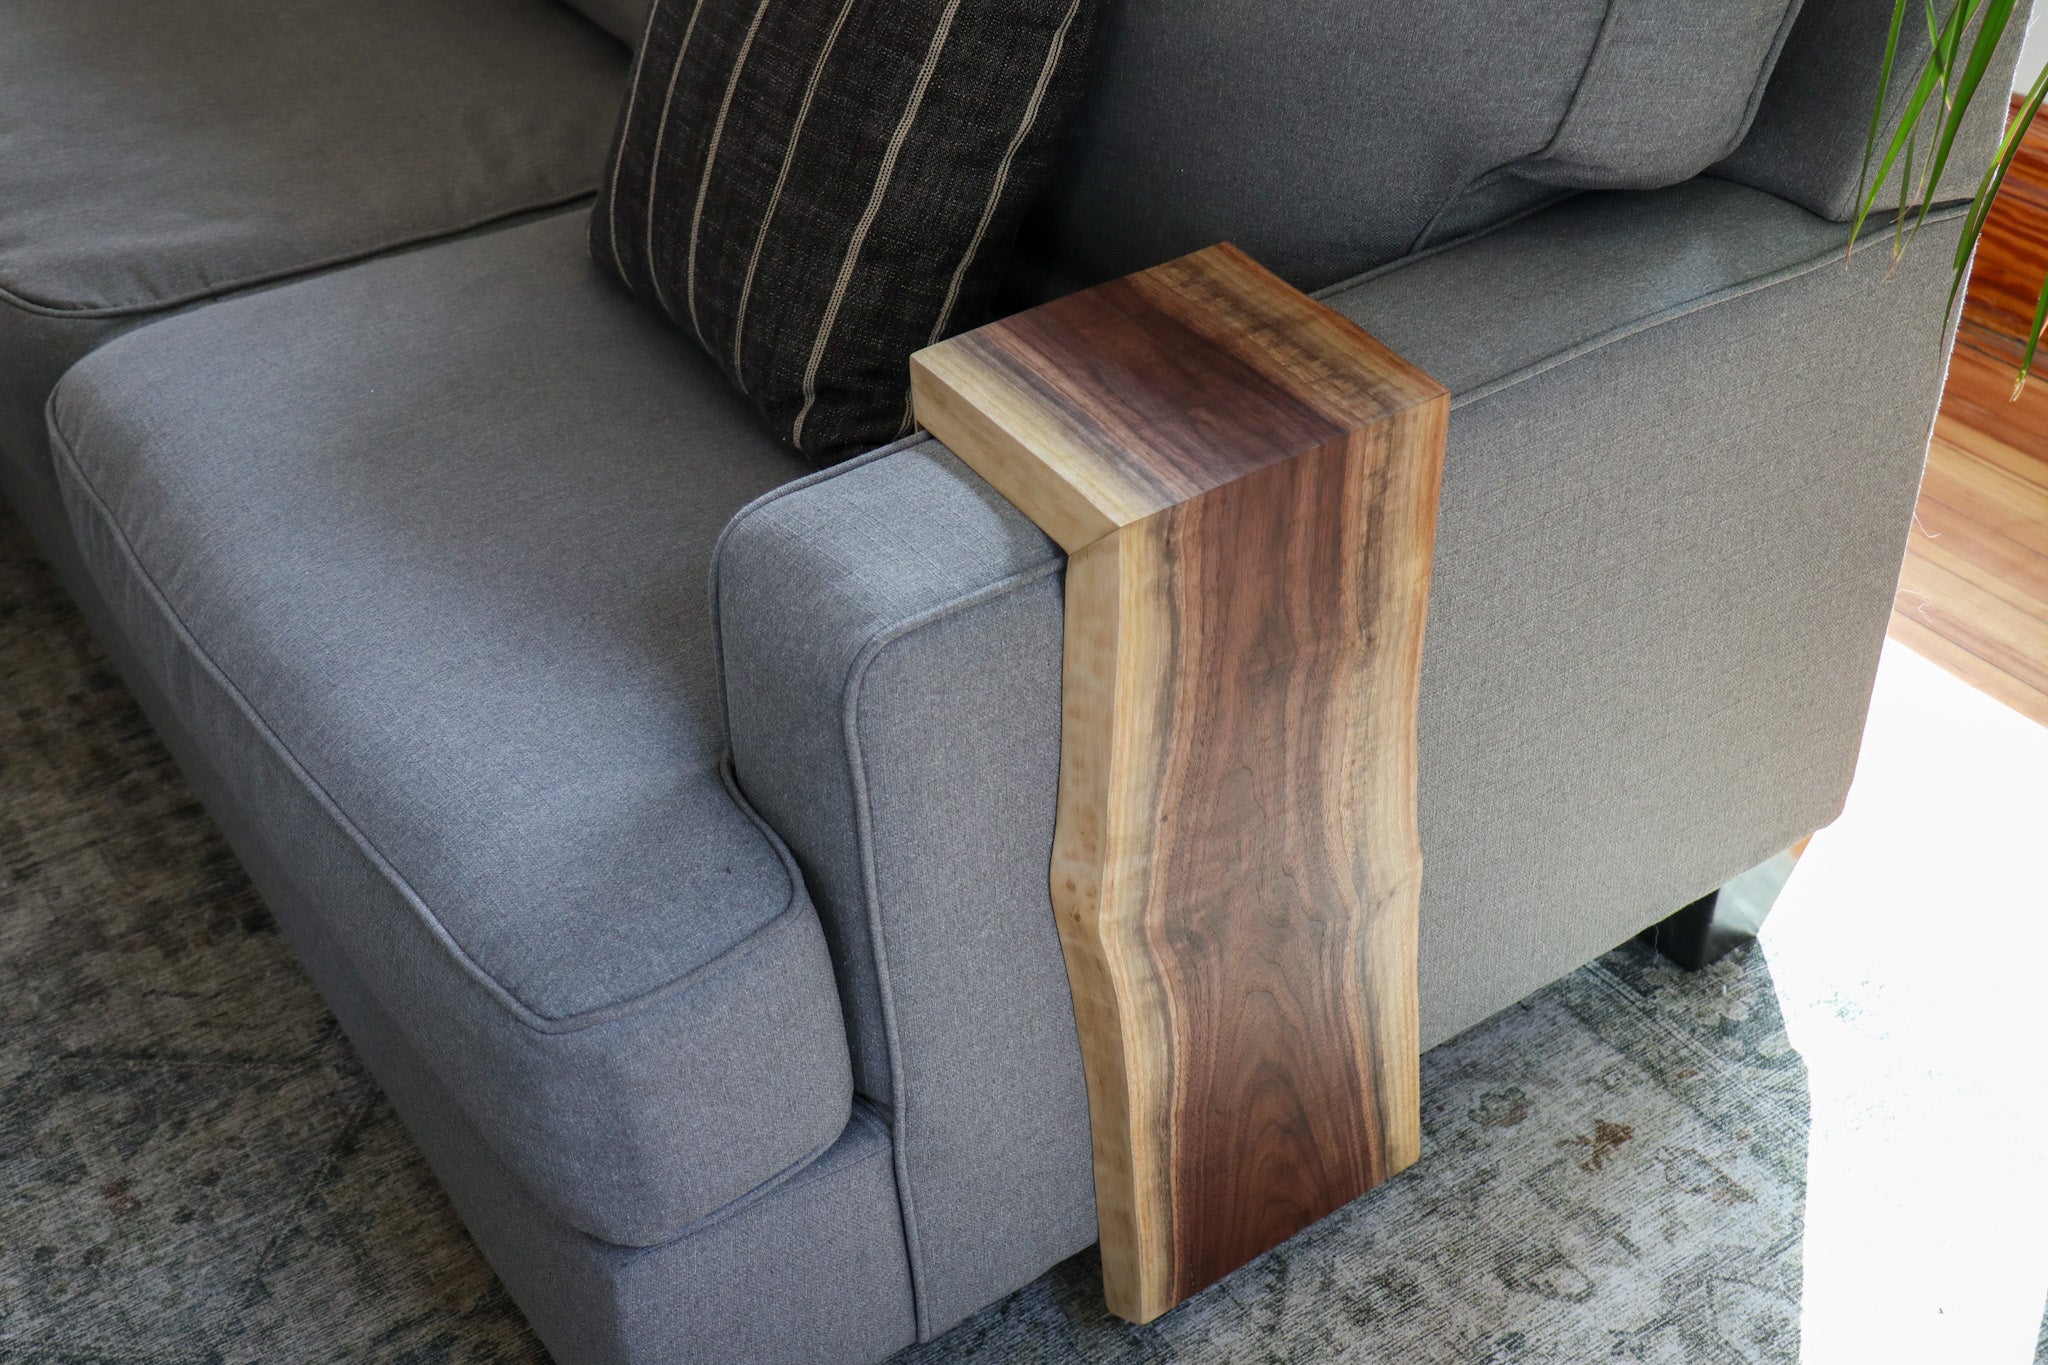 Live Edge Walnut Waterfall Armrest Sofa Table - Extra Long Square To the Floor